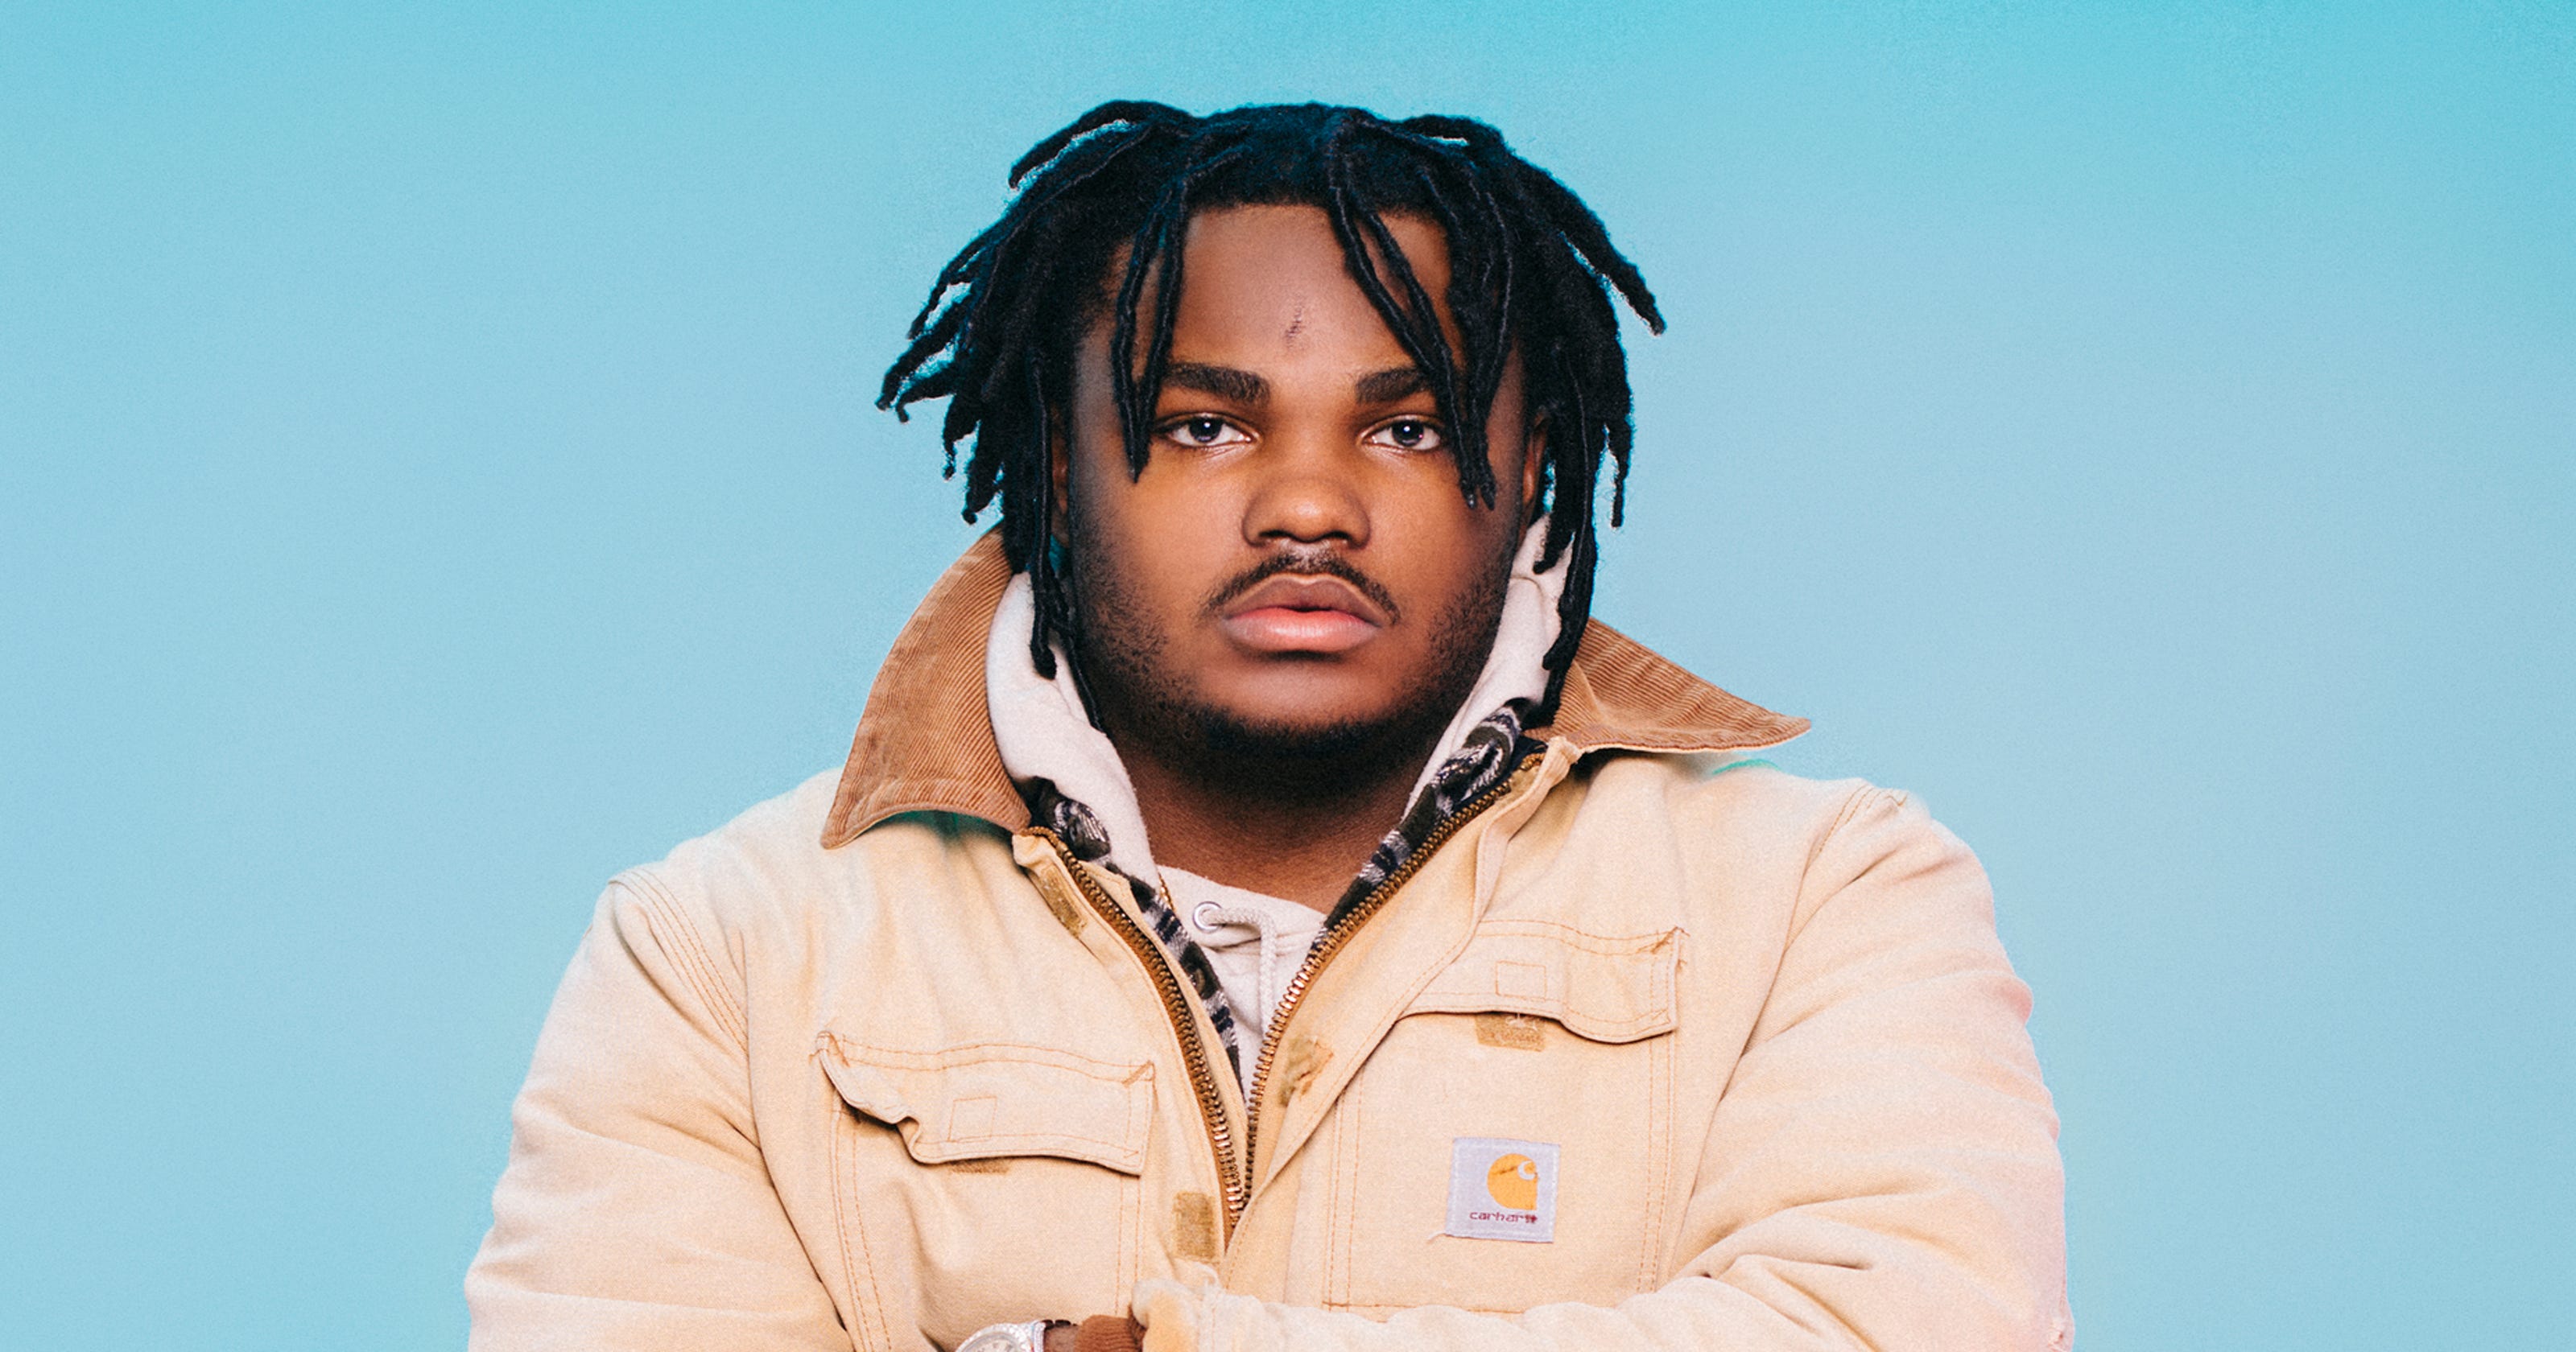 'First Day Out' puts Detroit rapper Tee Grizzley on the map